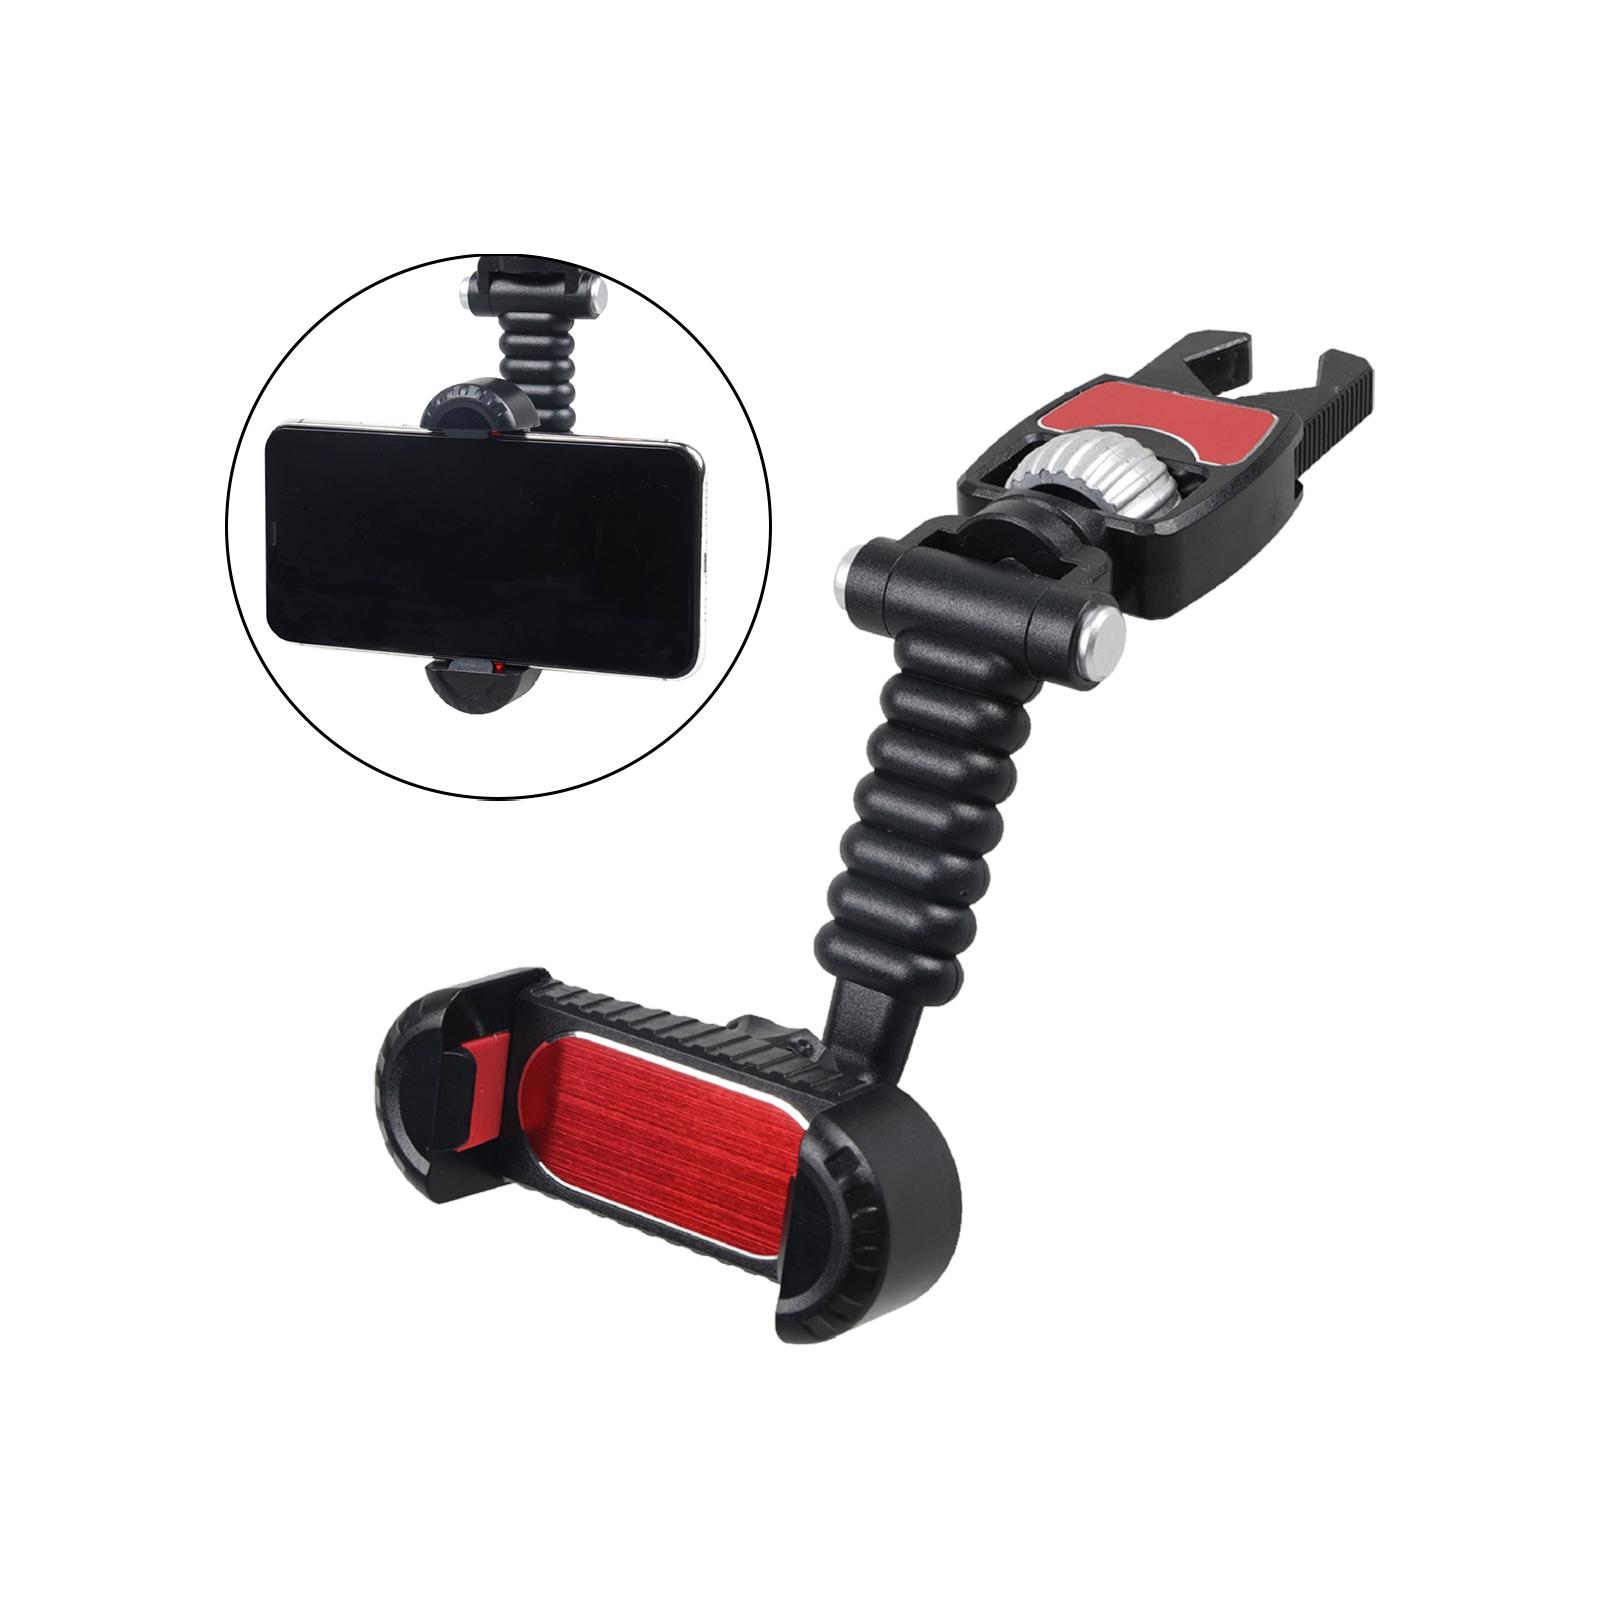 Universal Rearview Mirror Mount Holder for Phone Smartphone Cradle Red